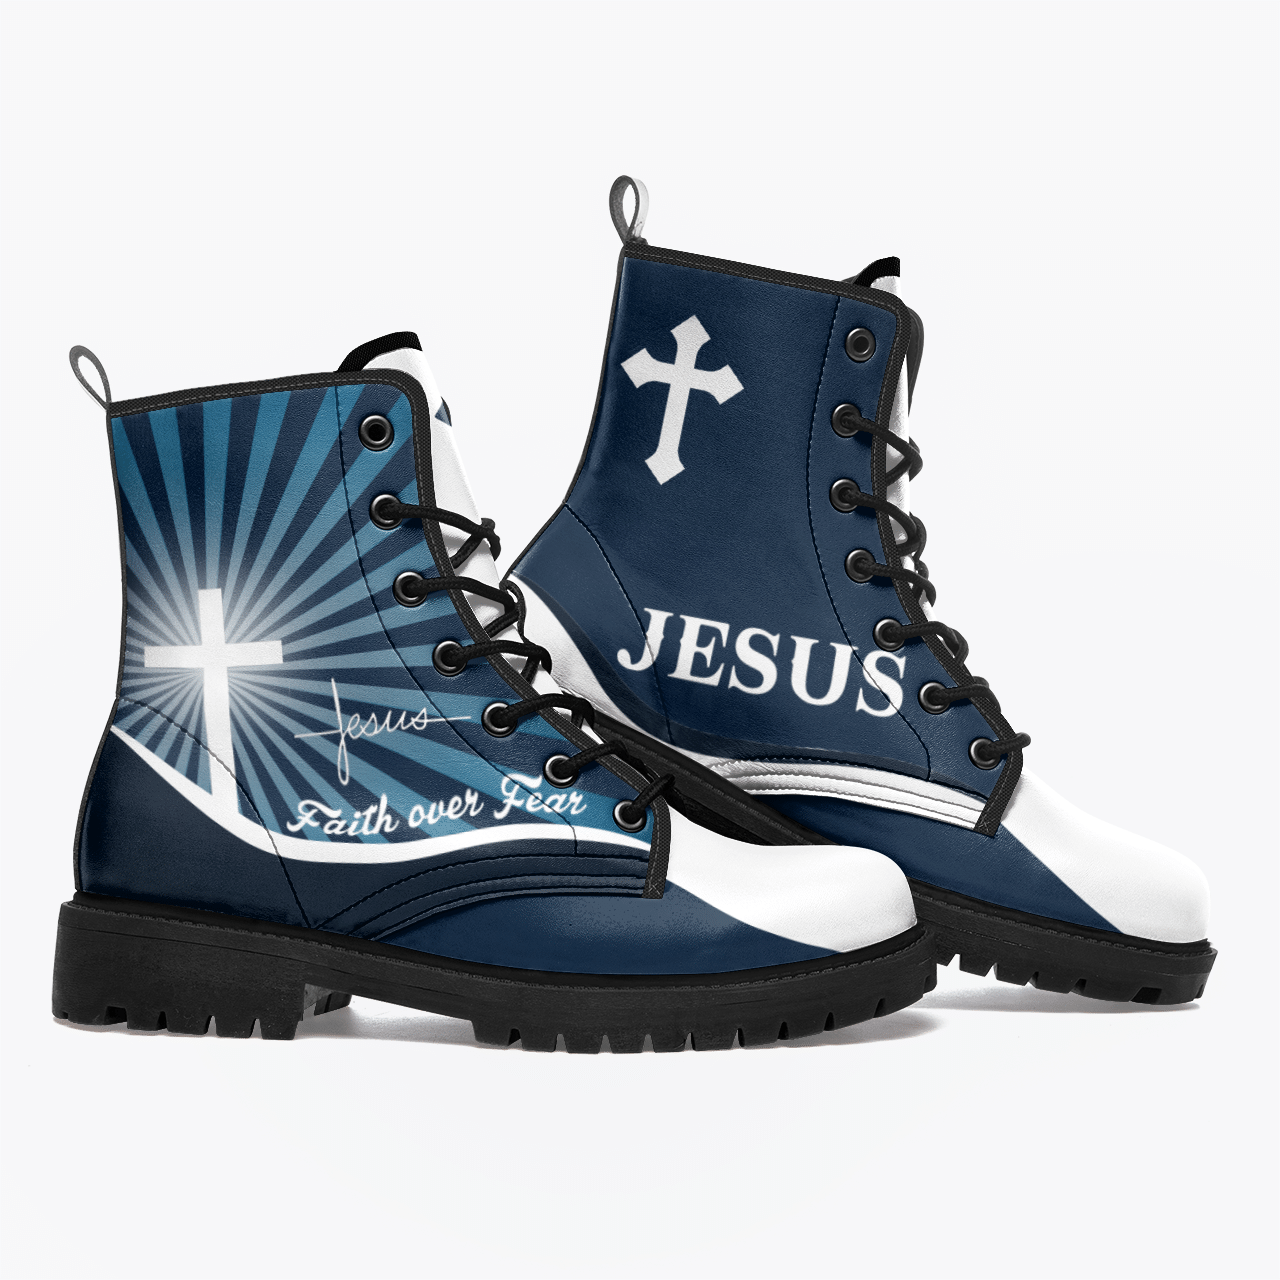 Jesus - Christ - Christians Faith Over Fear (Shoes, Leather Boots, Sneakers)